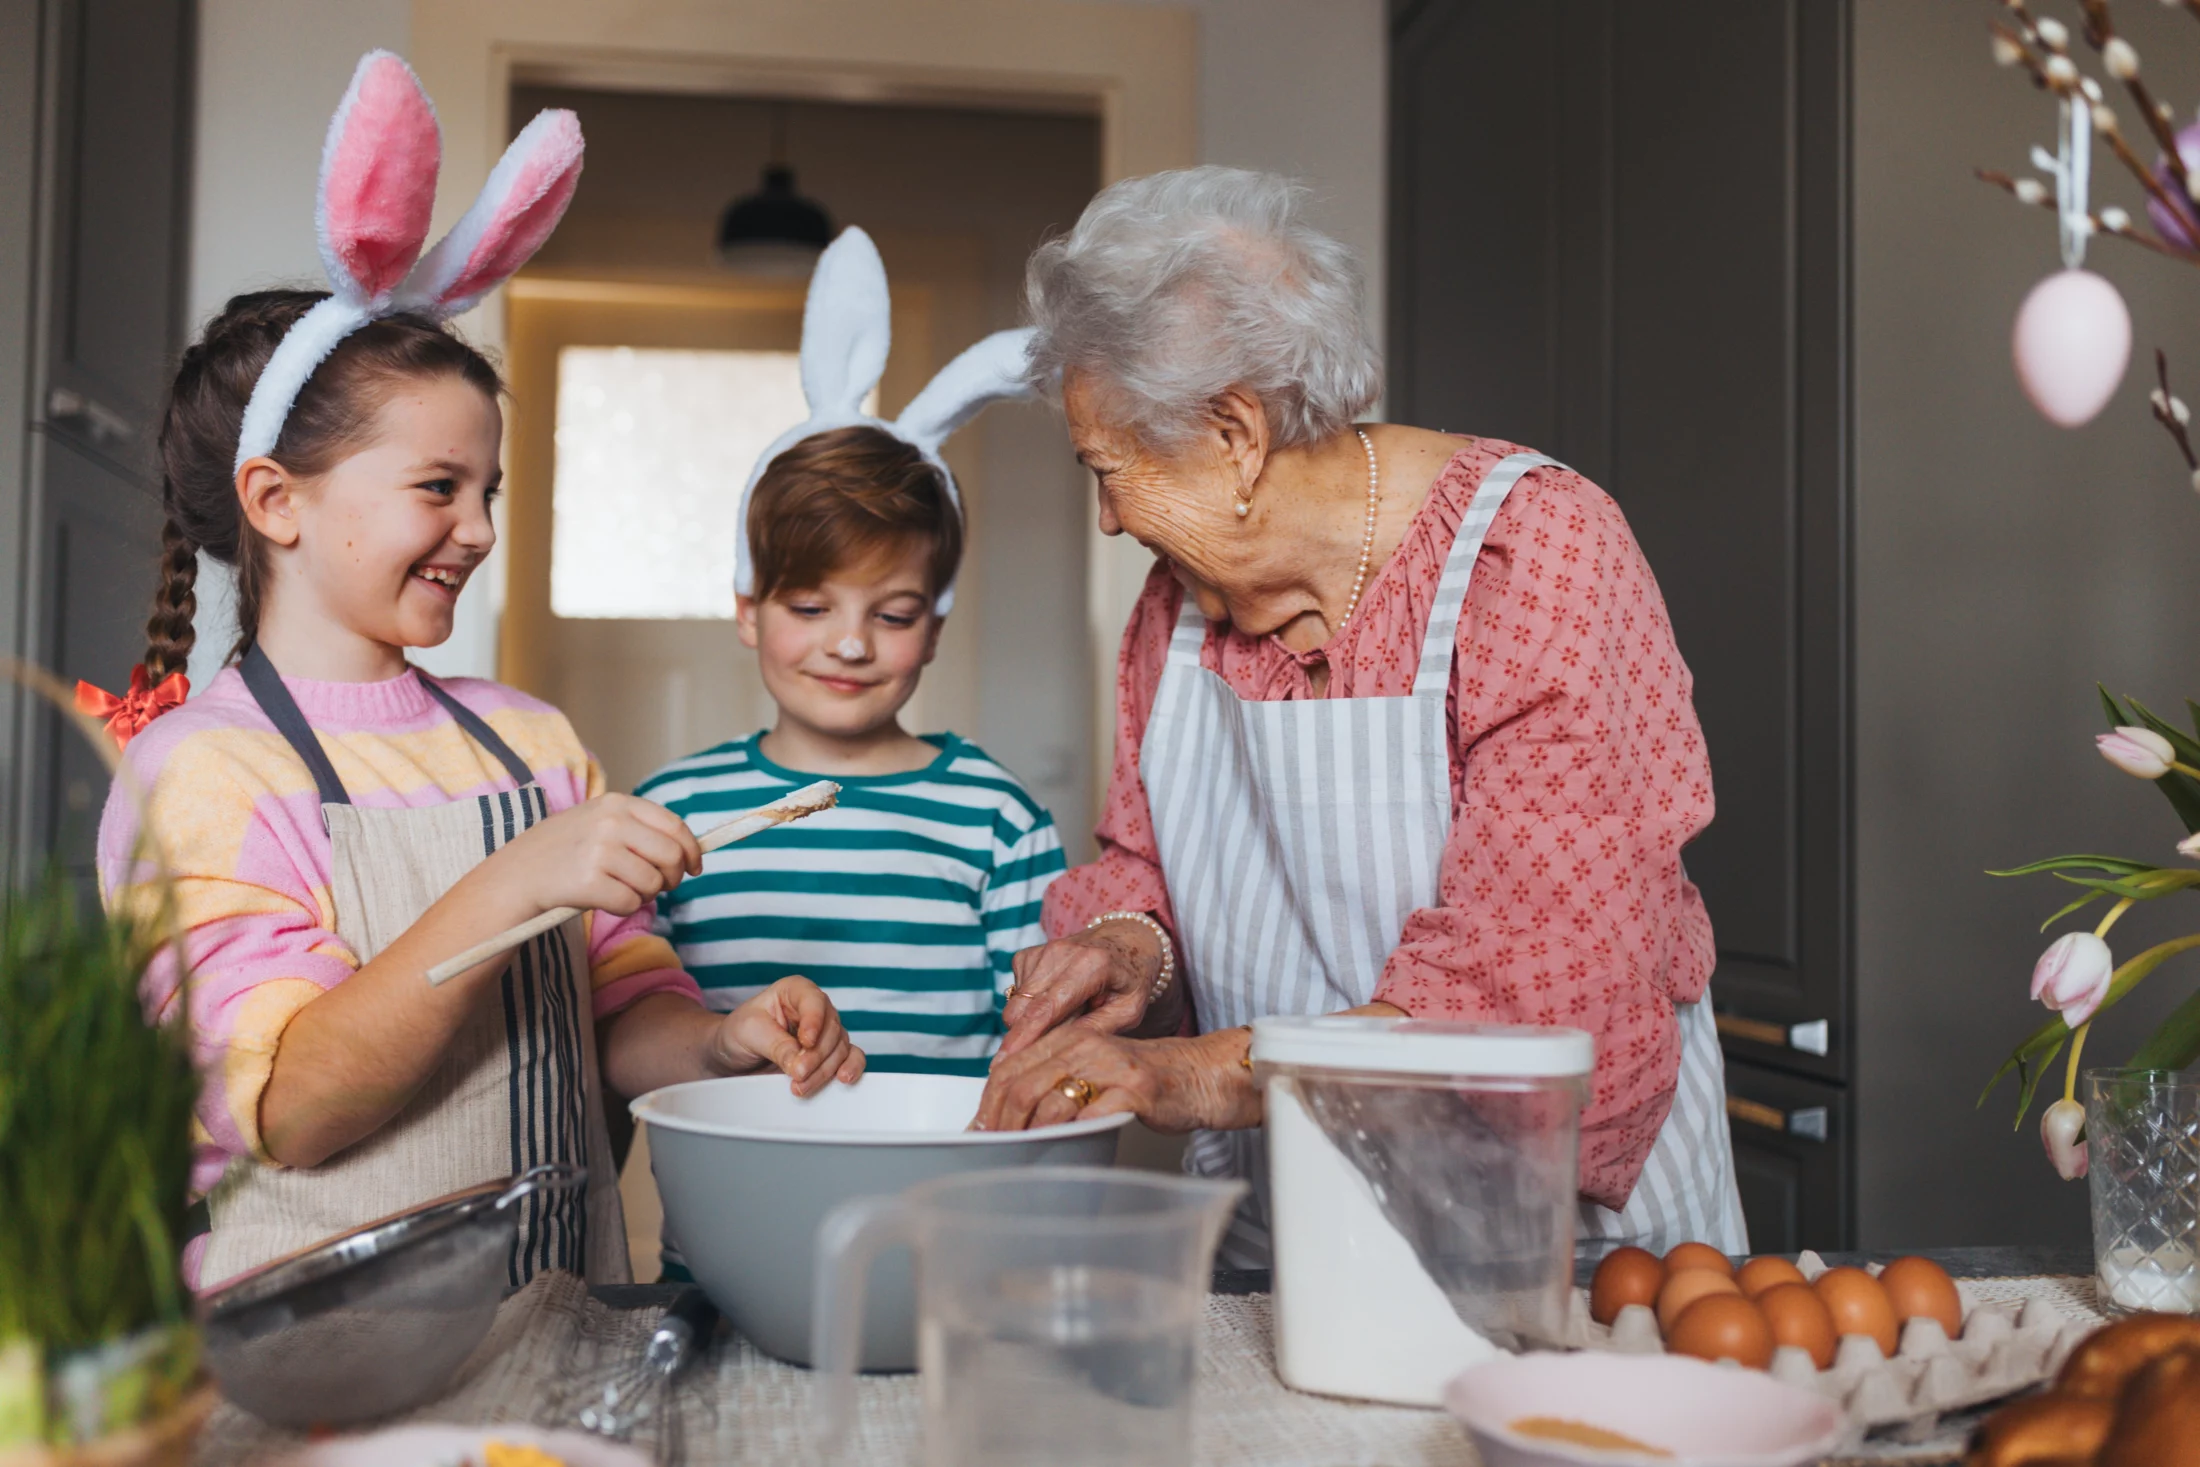 Easter gifts; baking for easter | Swoosh Finance